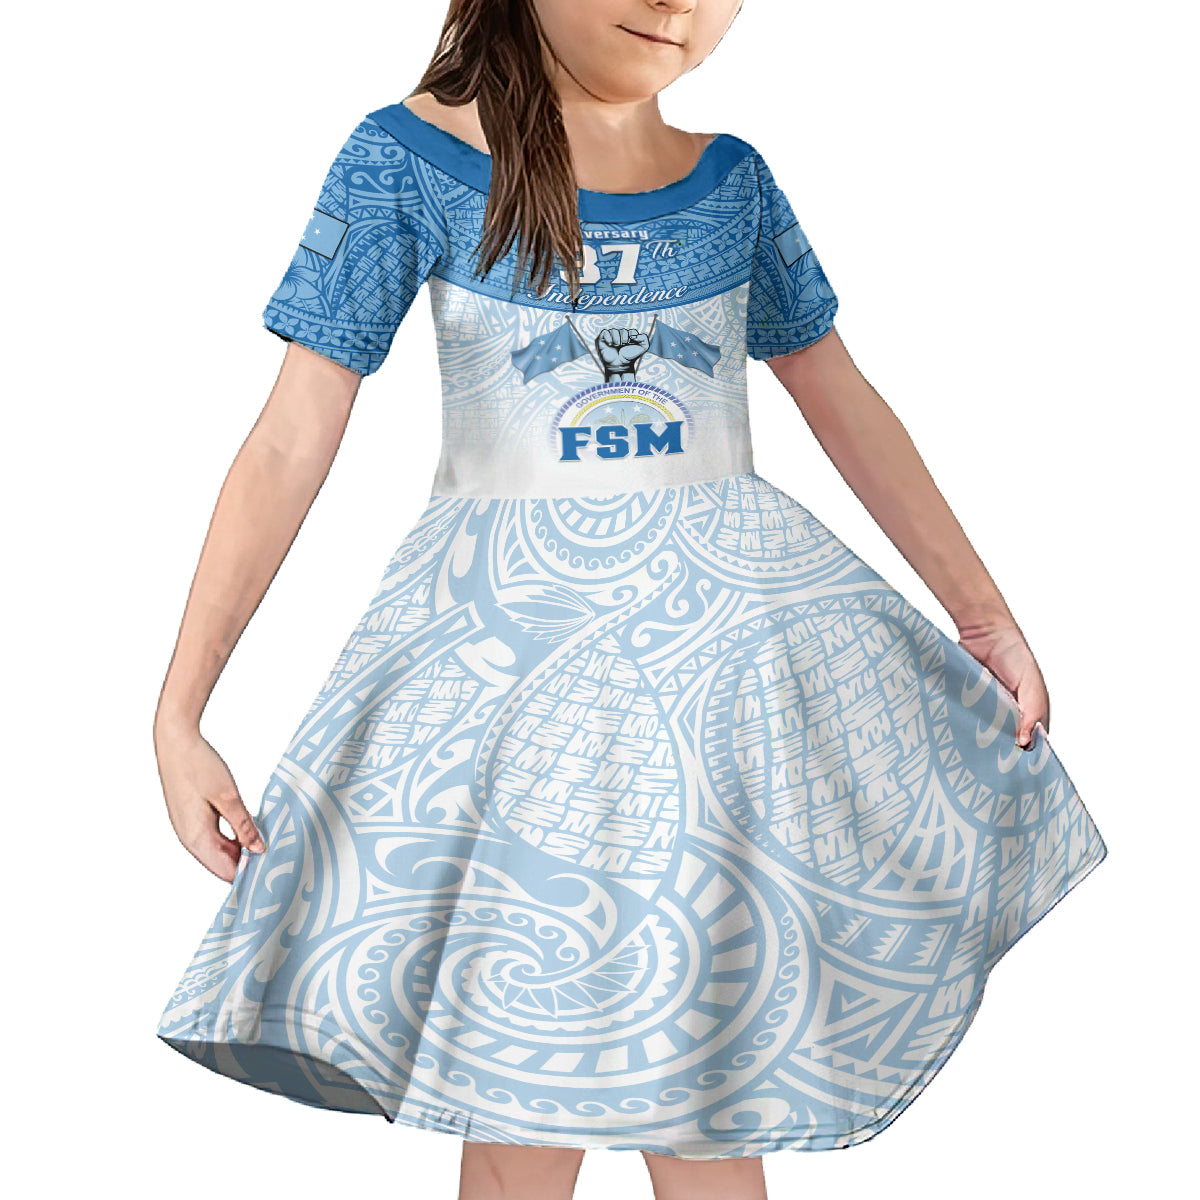 personalized-federated-states-of-micronesia-kid-short-sleeve-dress-happy-37th-independence-anniversary